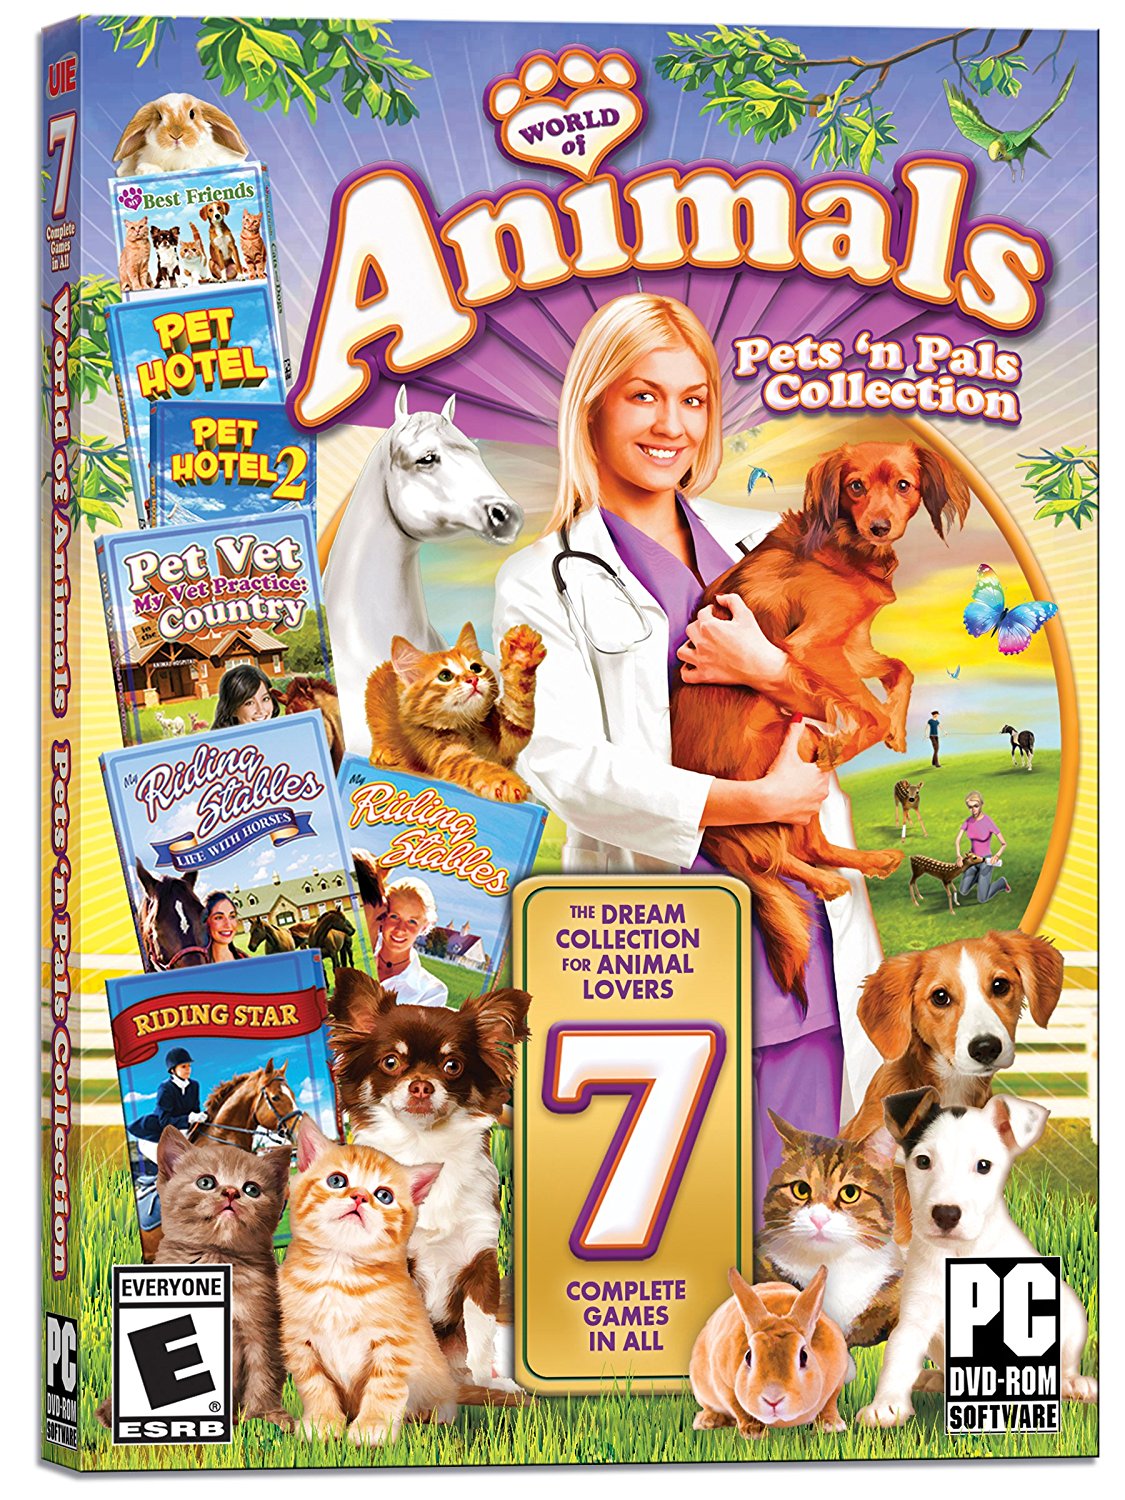 World of Animals - Pets 'n Pals Collection